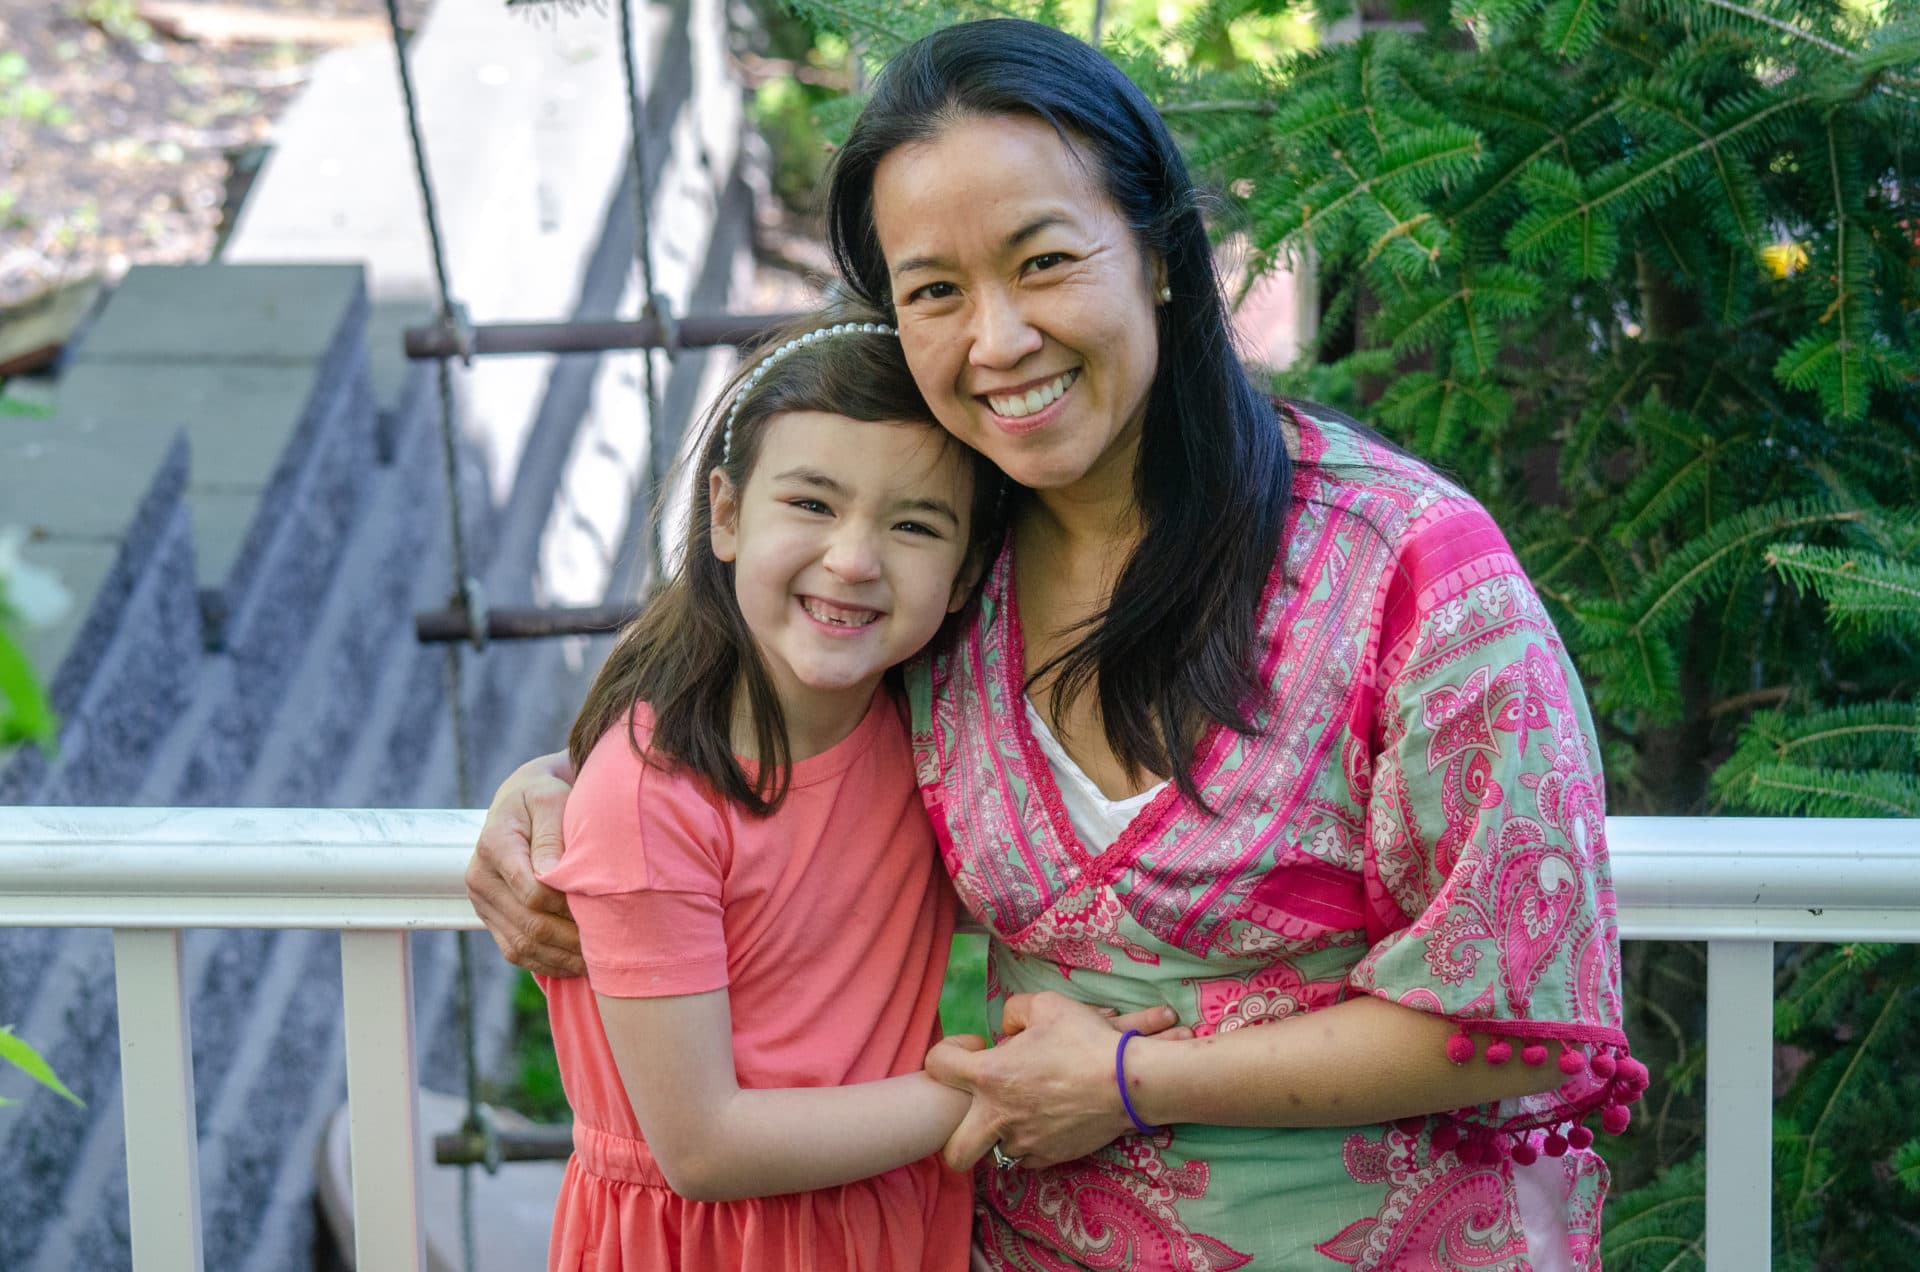 Kaili Gormley and her mother Shan Liu, at home in Brookline. (Photo by Sharon Brody)